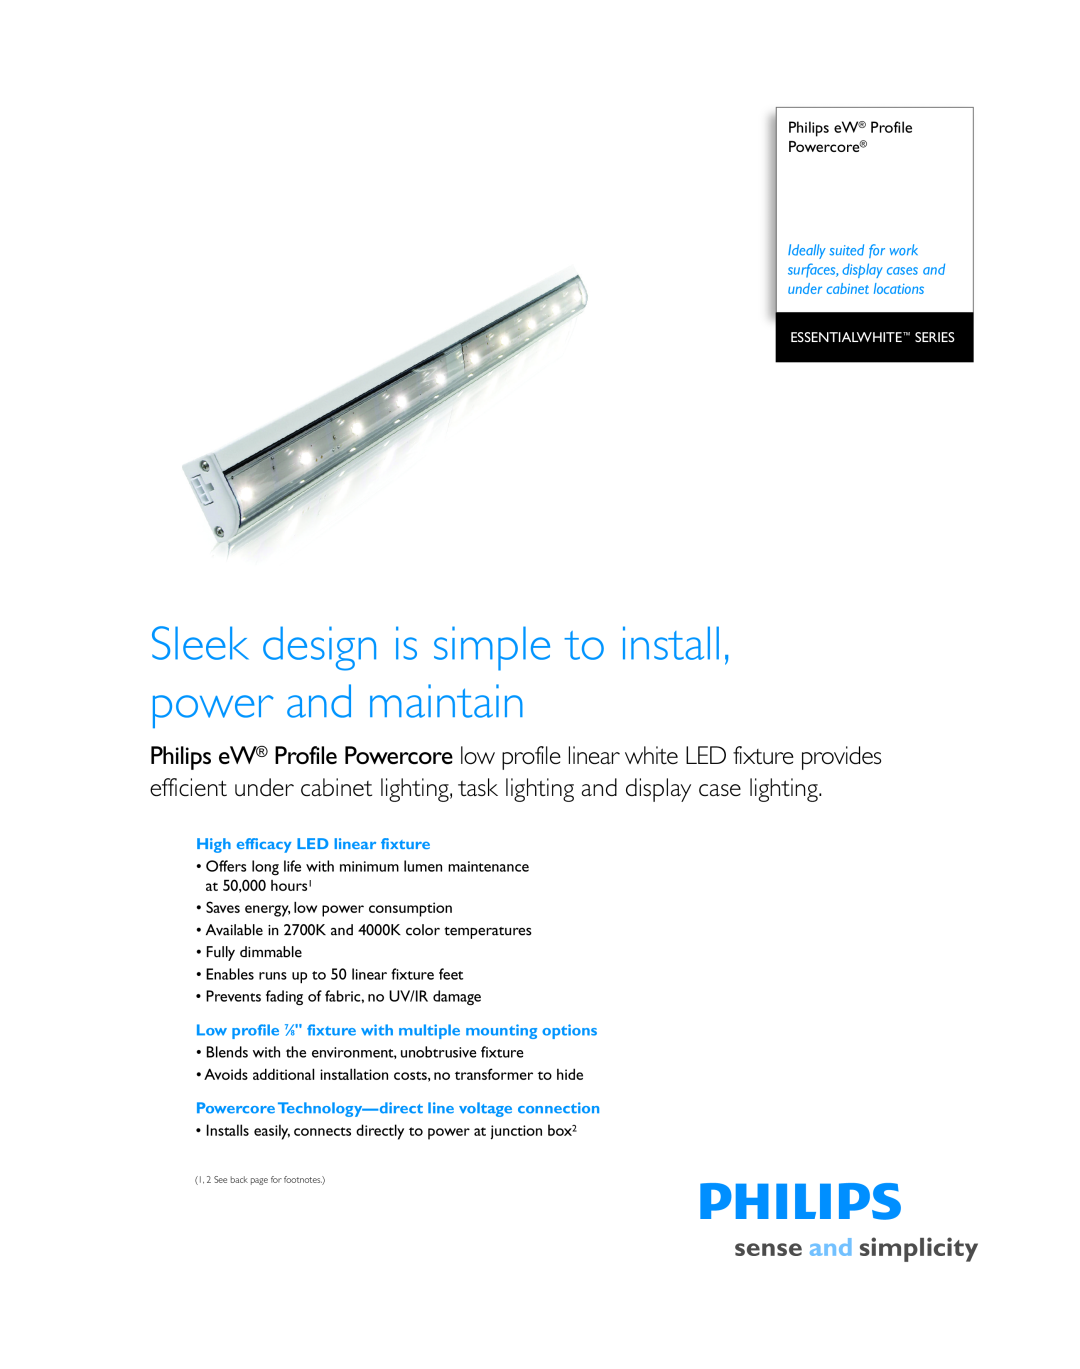 Philips P-5978-A manual High efficacy LED linear fixture, PowercoreTechnology-directline voltage connection 